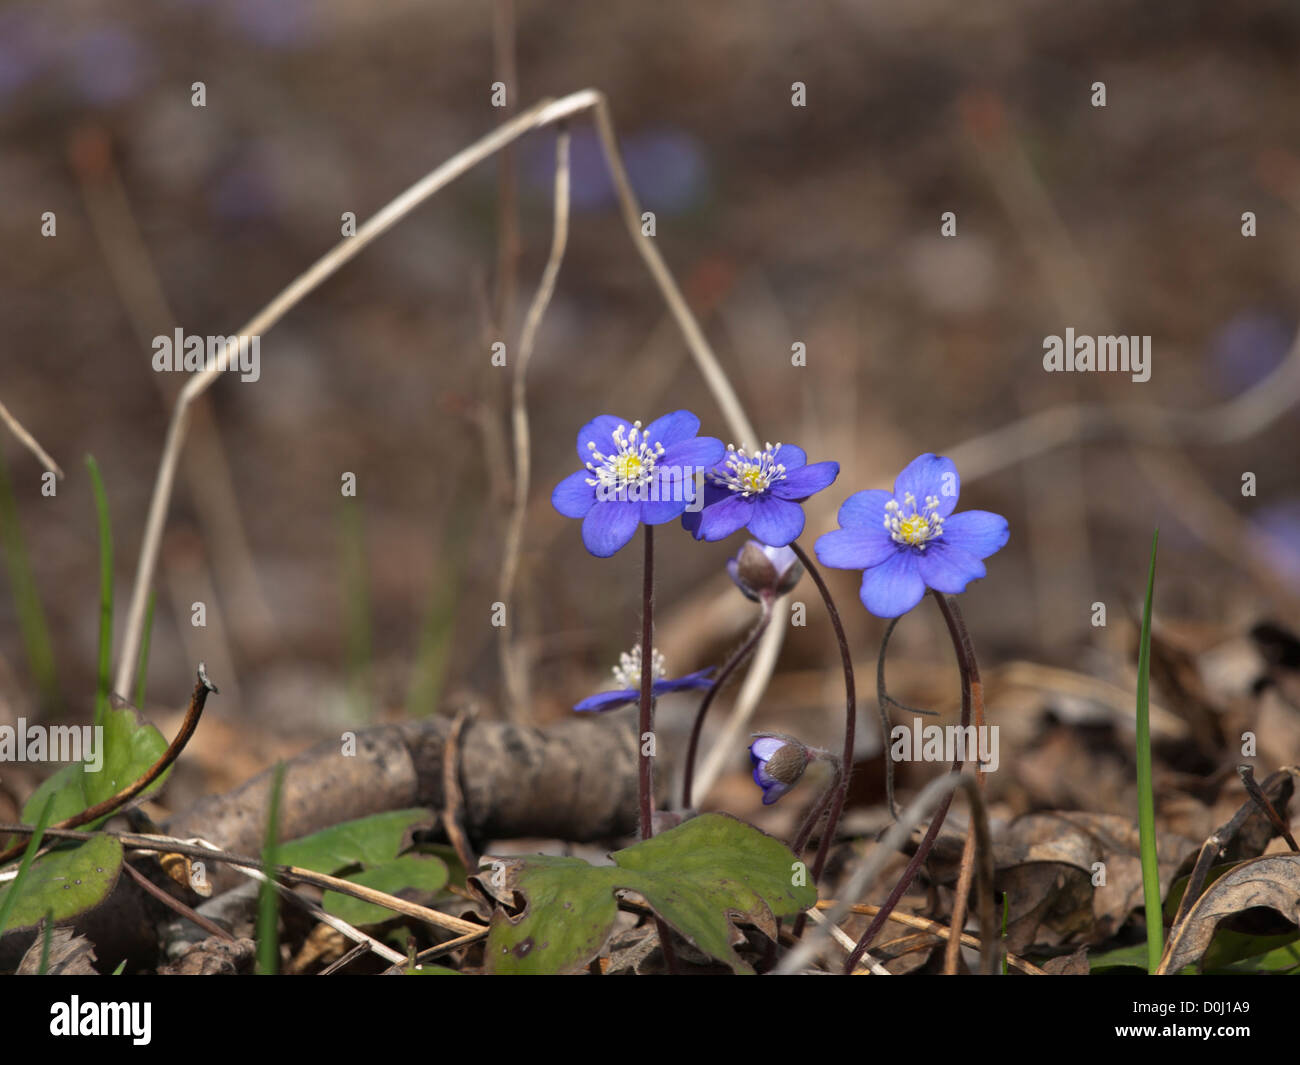 Anemone hepatica, liverwort or pennywort, a wonder of springtime emerging from under dead leaves in Oslo Norway Stock Photo